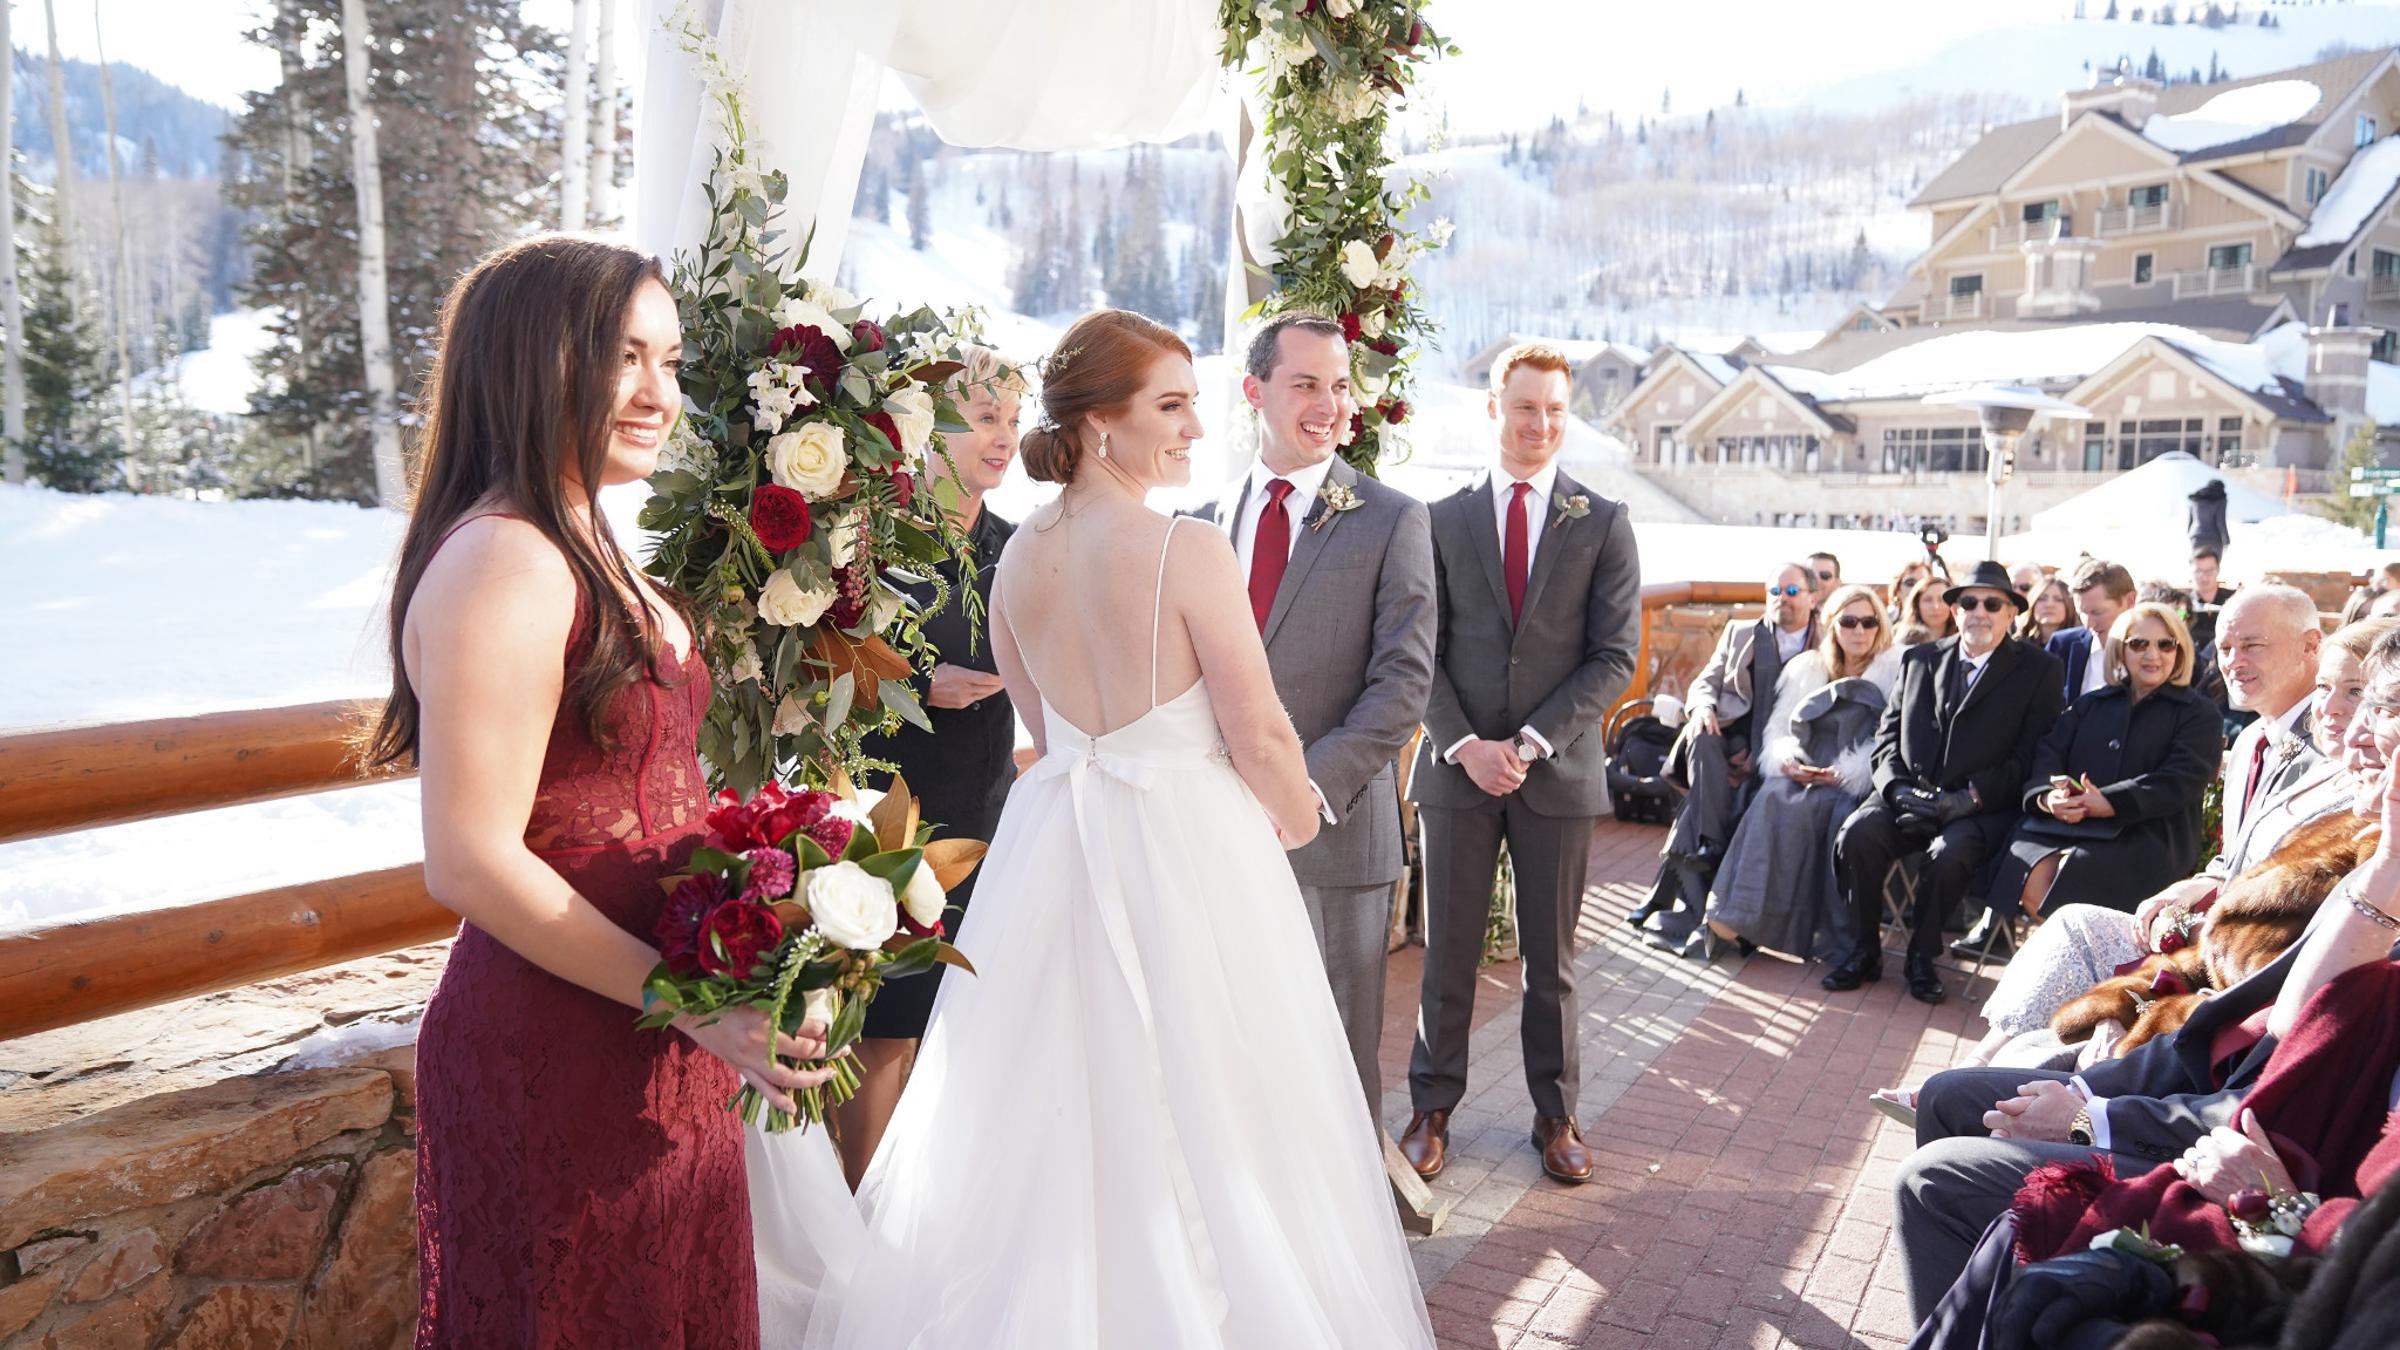 A winter wedding ceremony at Empire Canyon Lodge